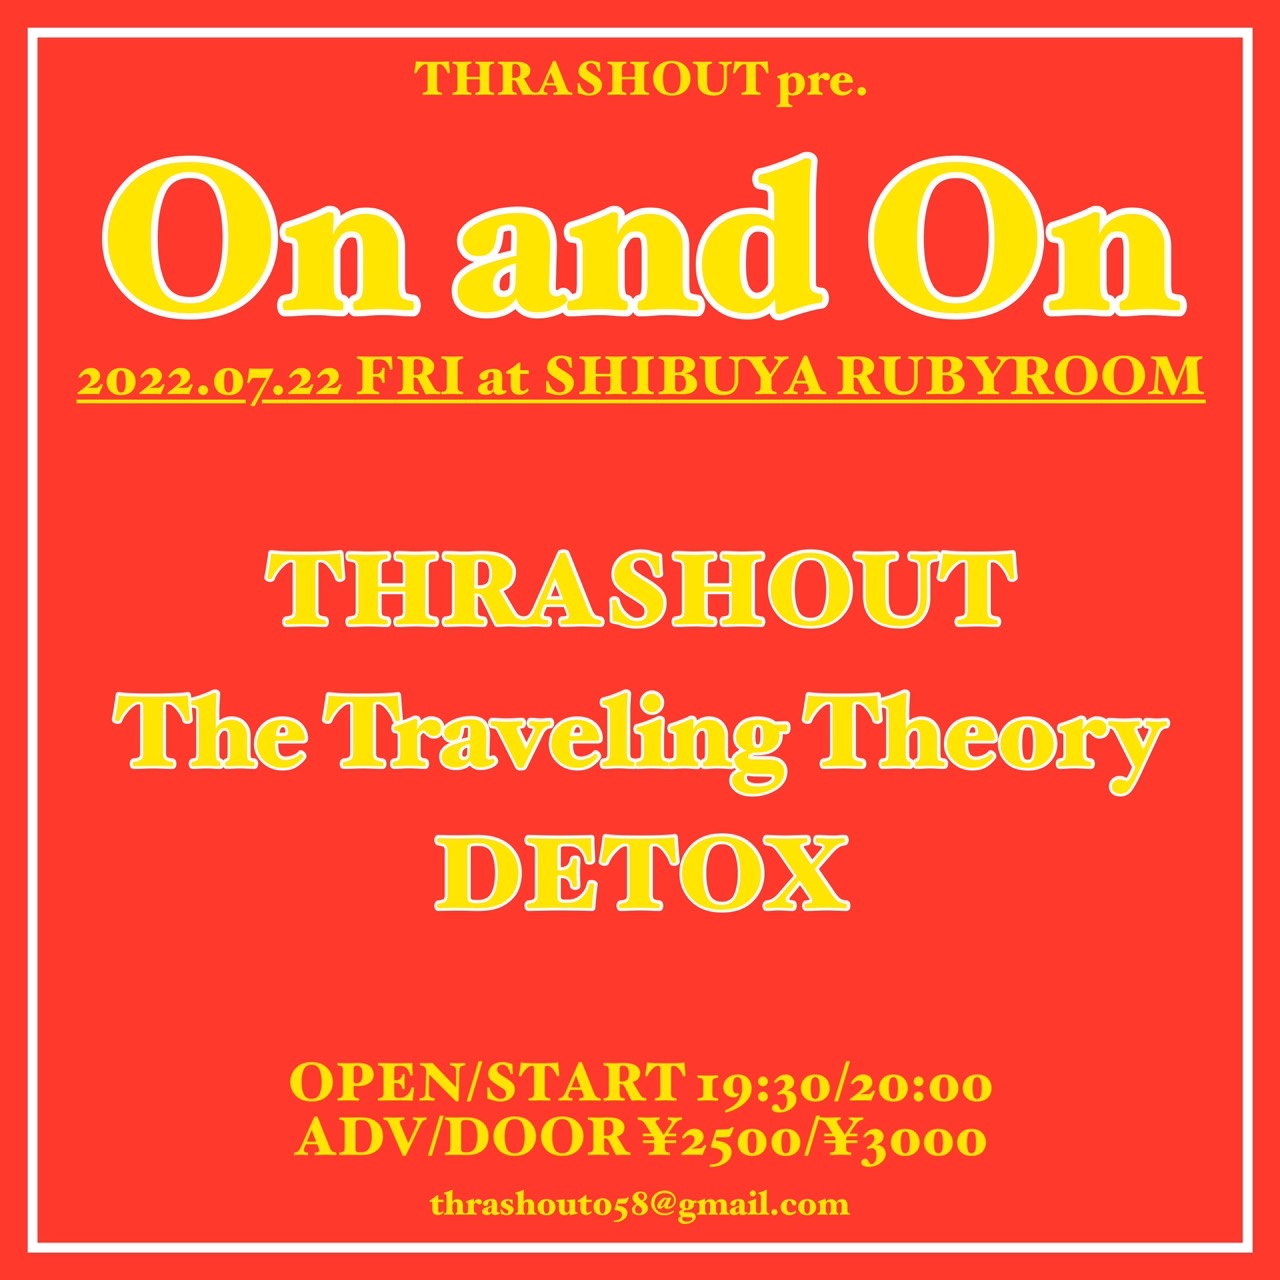 THRASHOUT pre. On and On